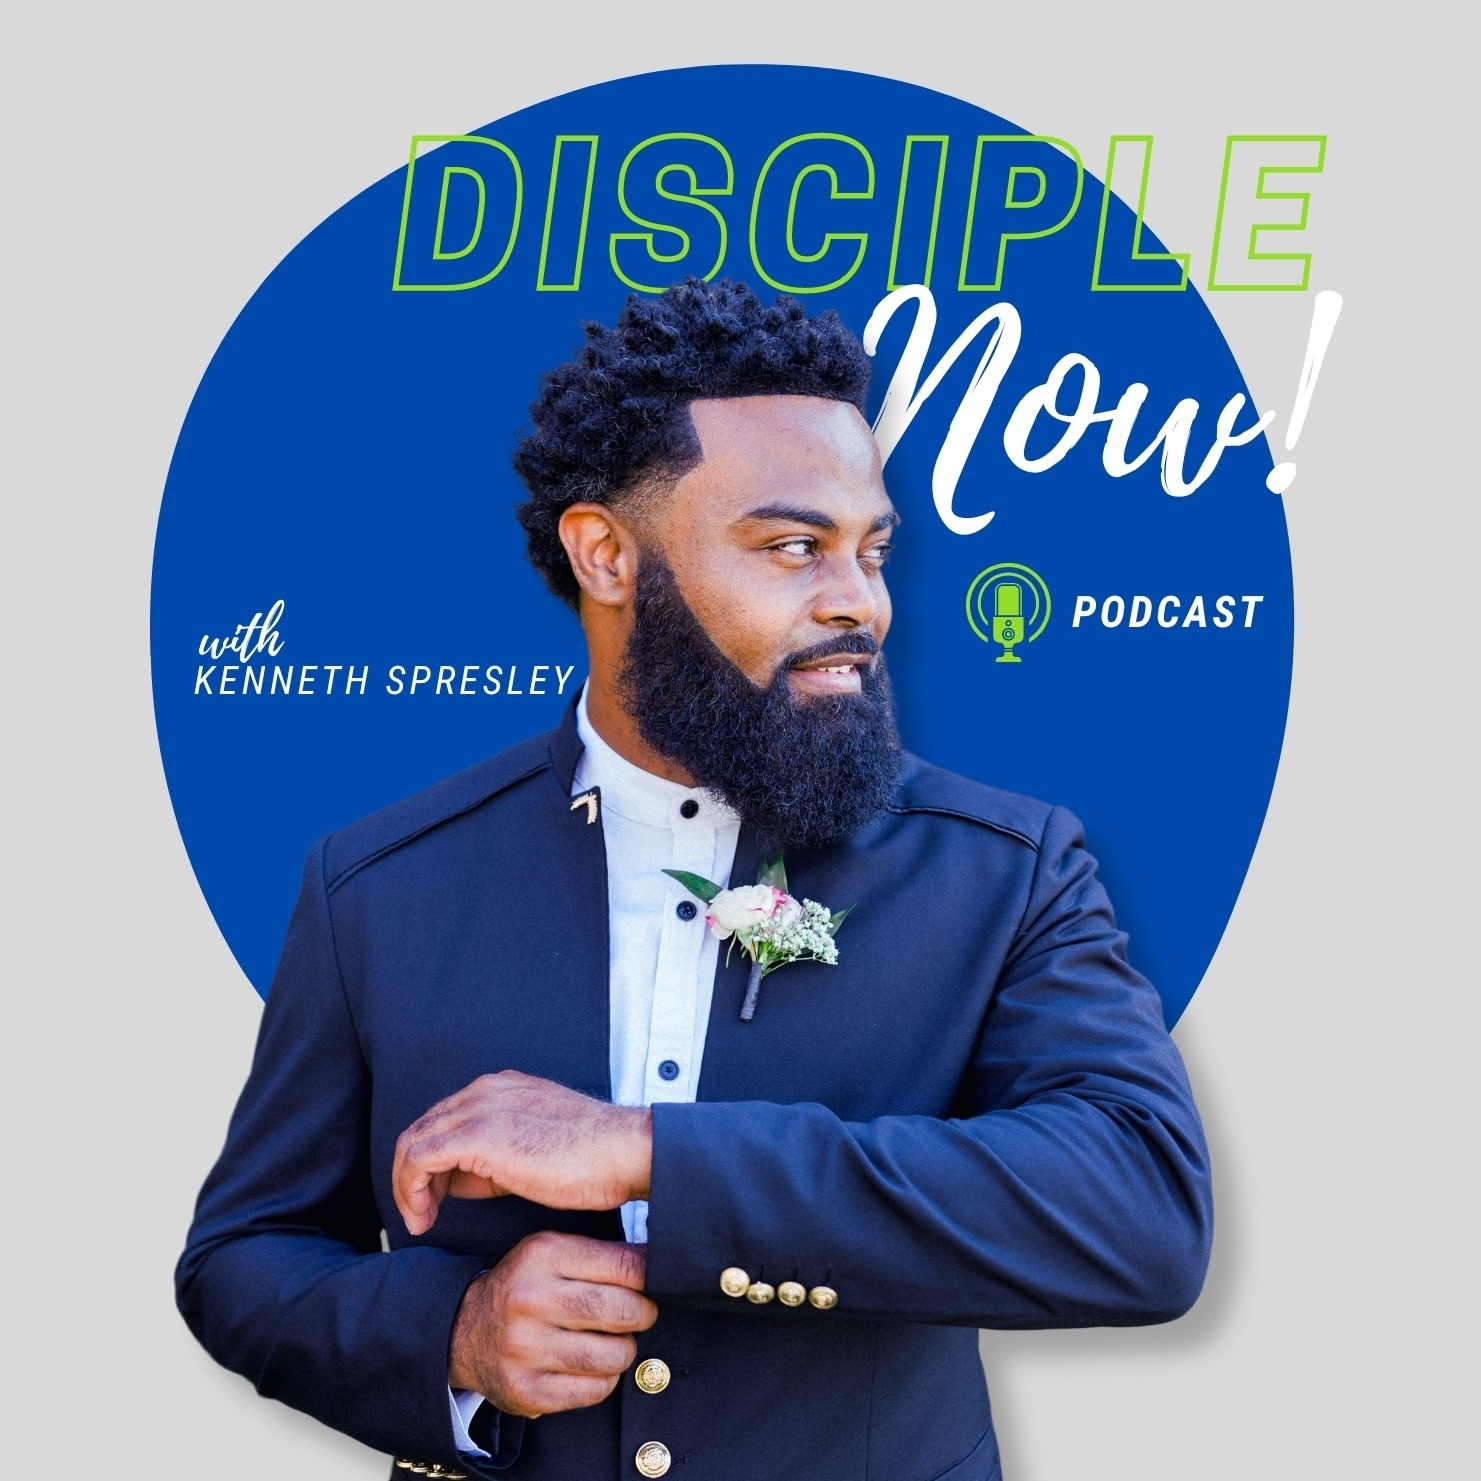 The Disciple Now Podcast